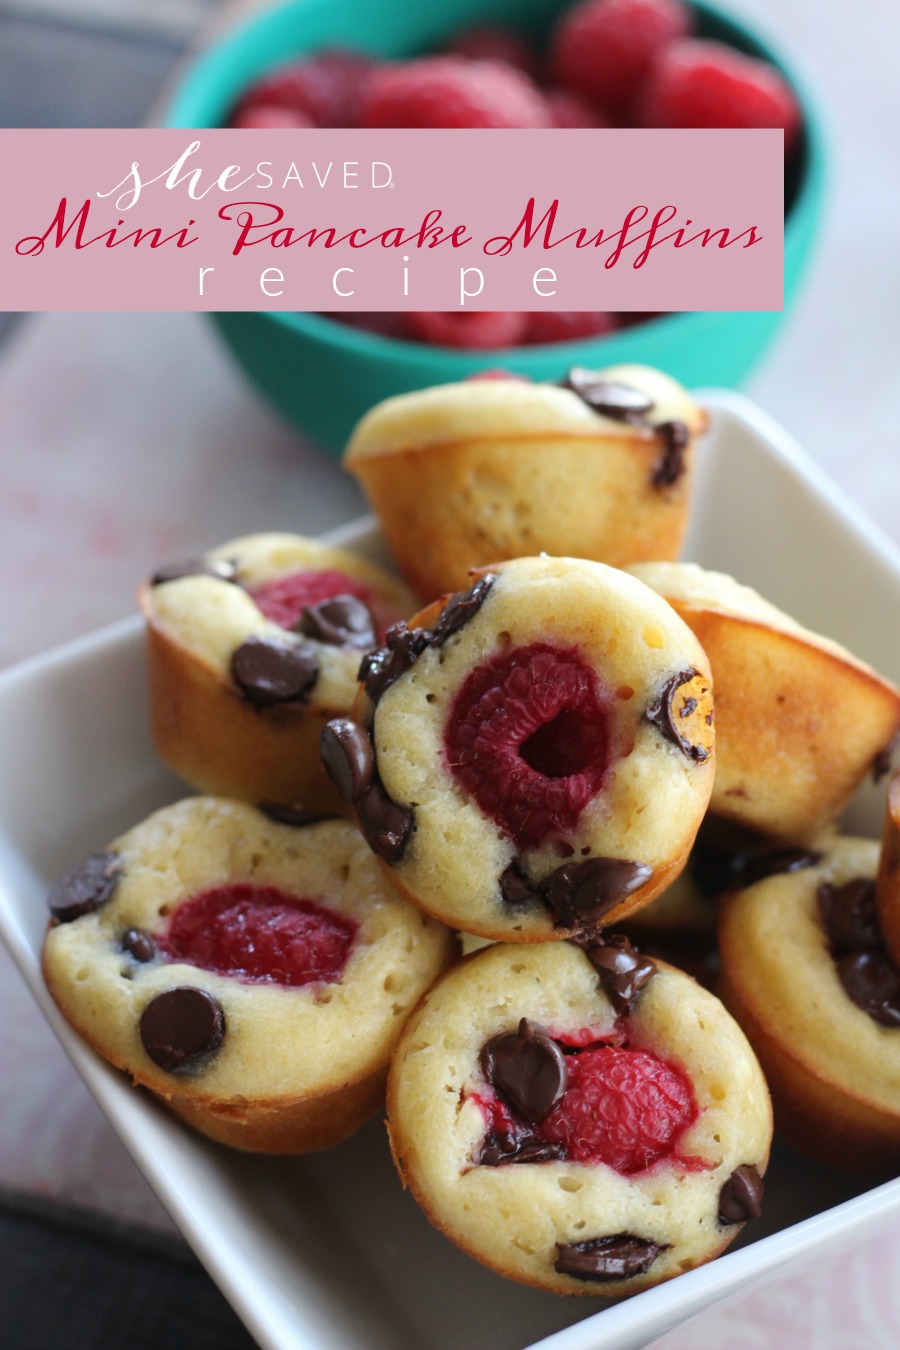 Easy and so yummy, this Pancake Muffins Recipe will be a hit for breakfast, and perfect for Valentine's Day!